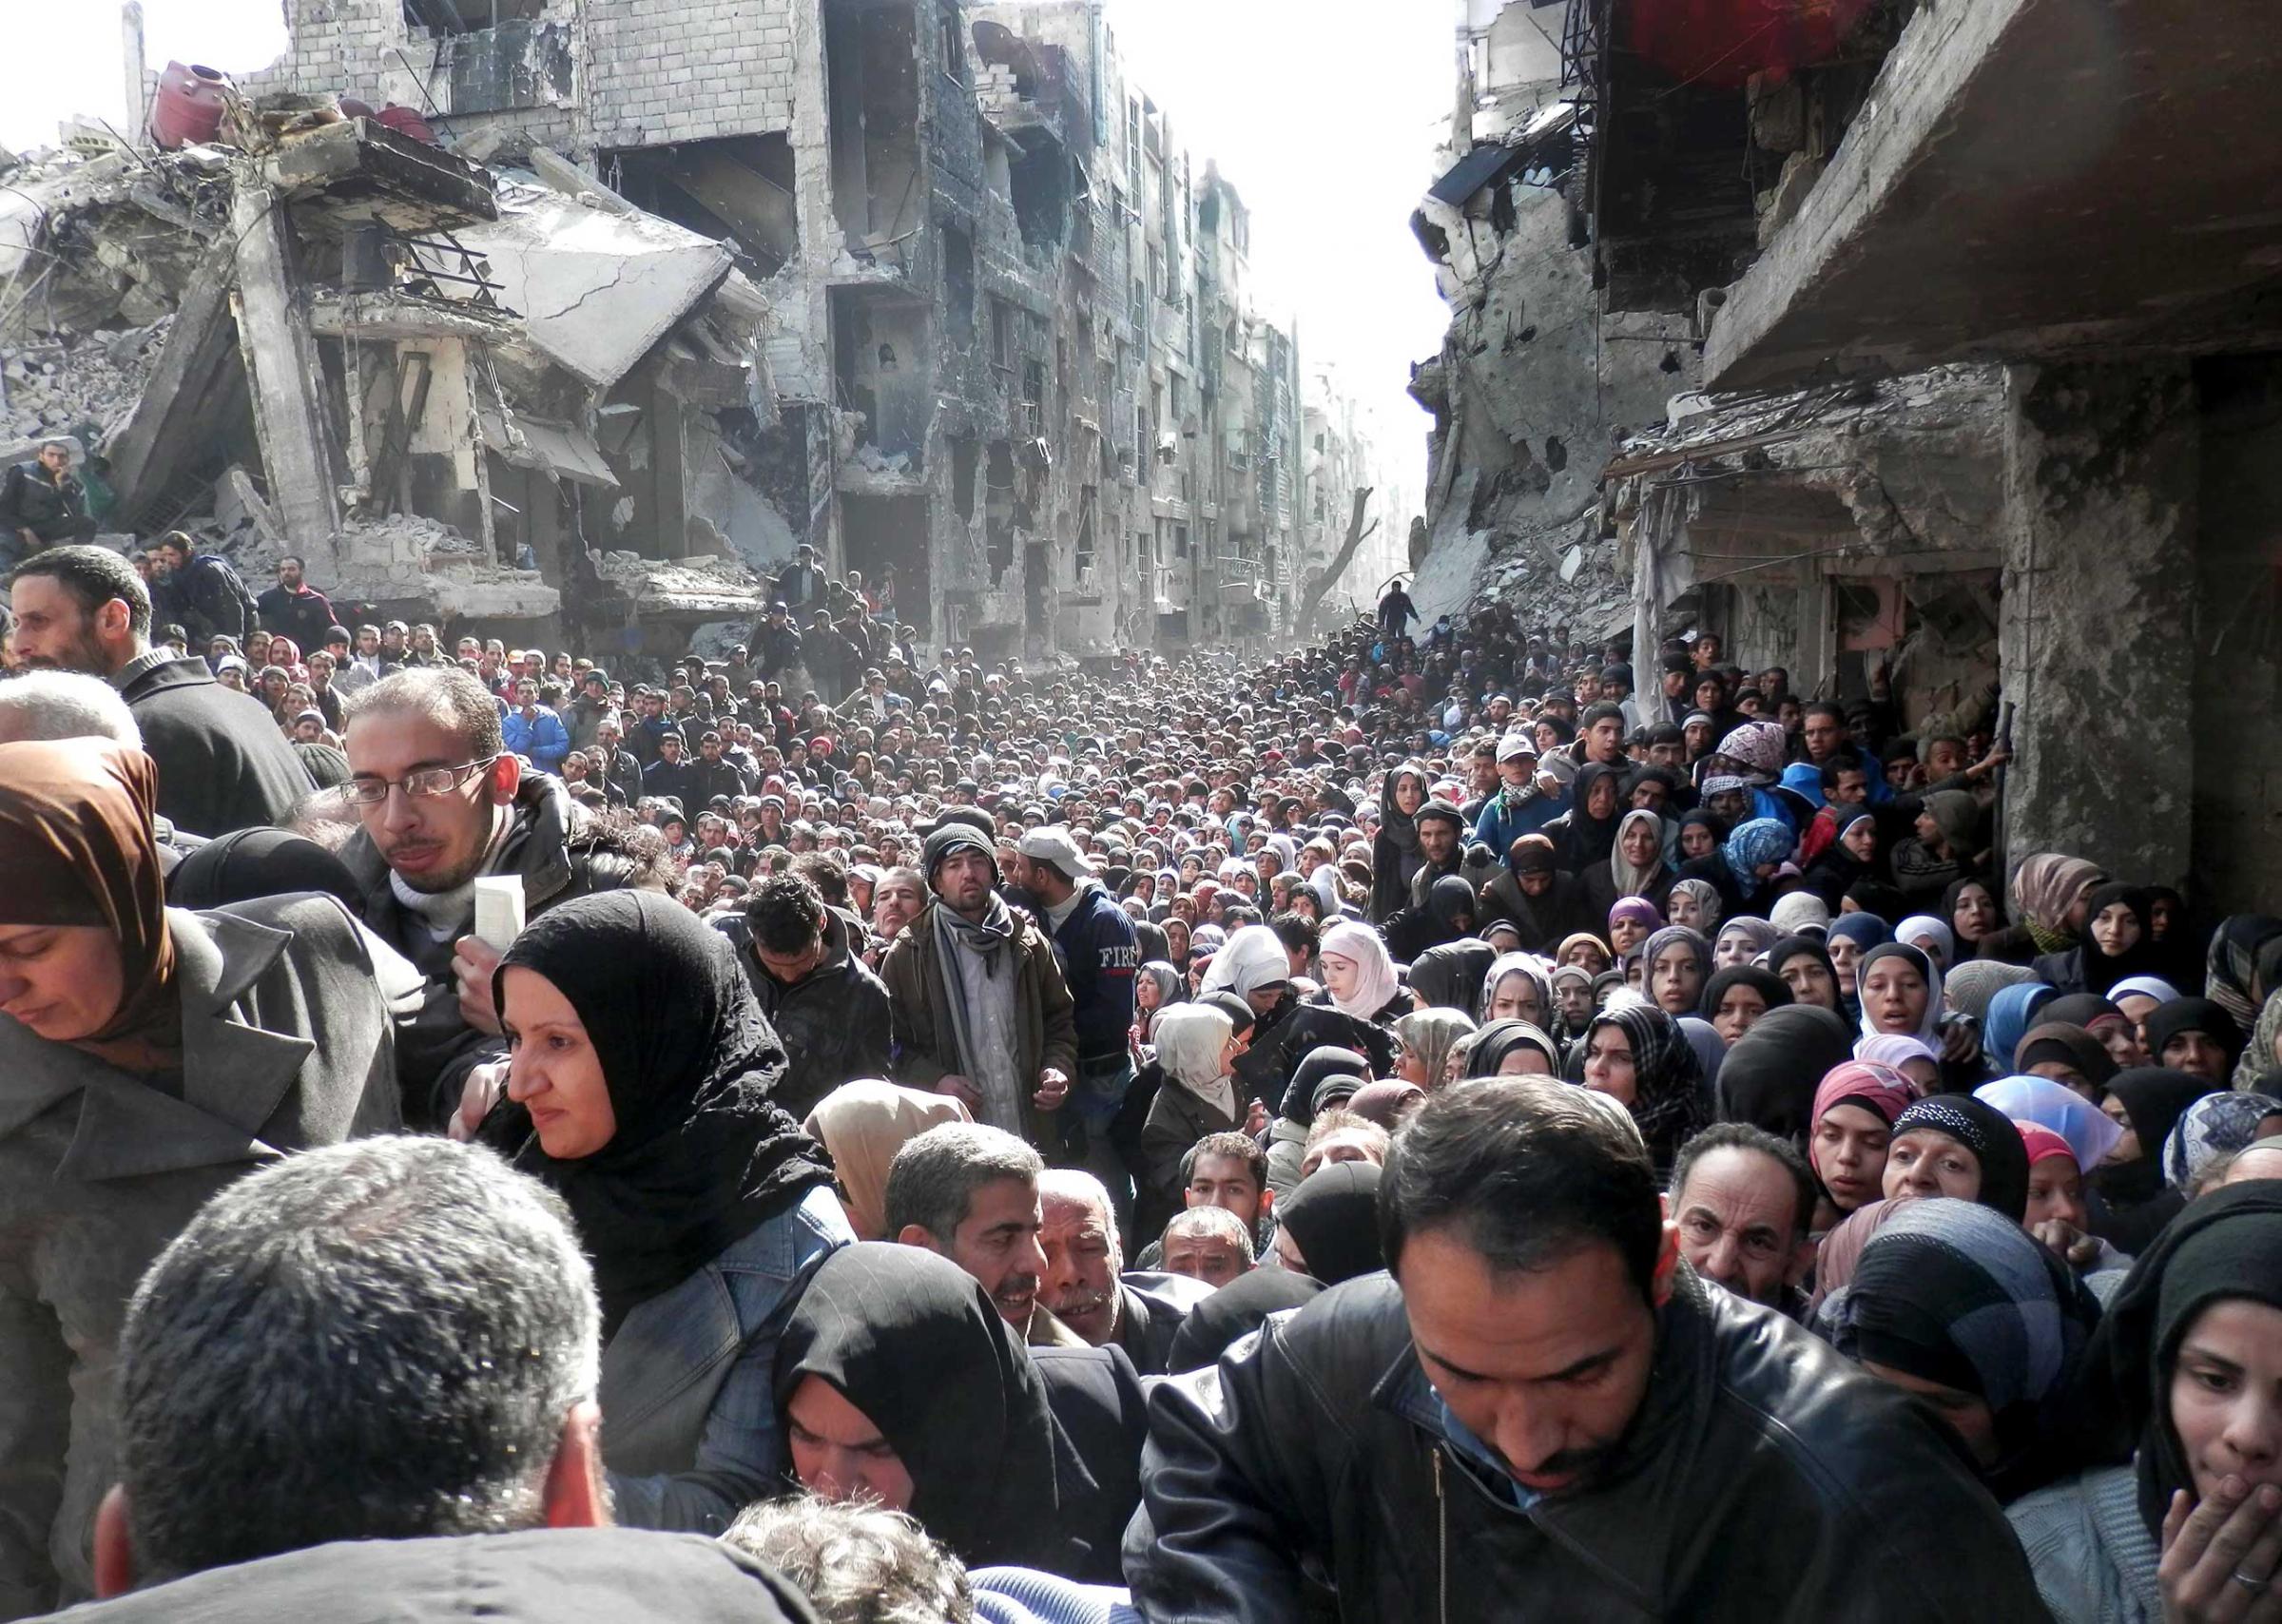 A handout photo of Palestinian refugees waiting for food aid in the Yarmouk camp on the outskirts of Damascus, Syria, Jan. 31, 2014.